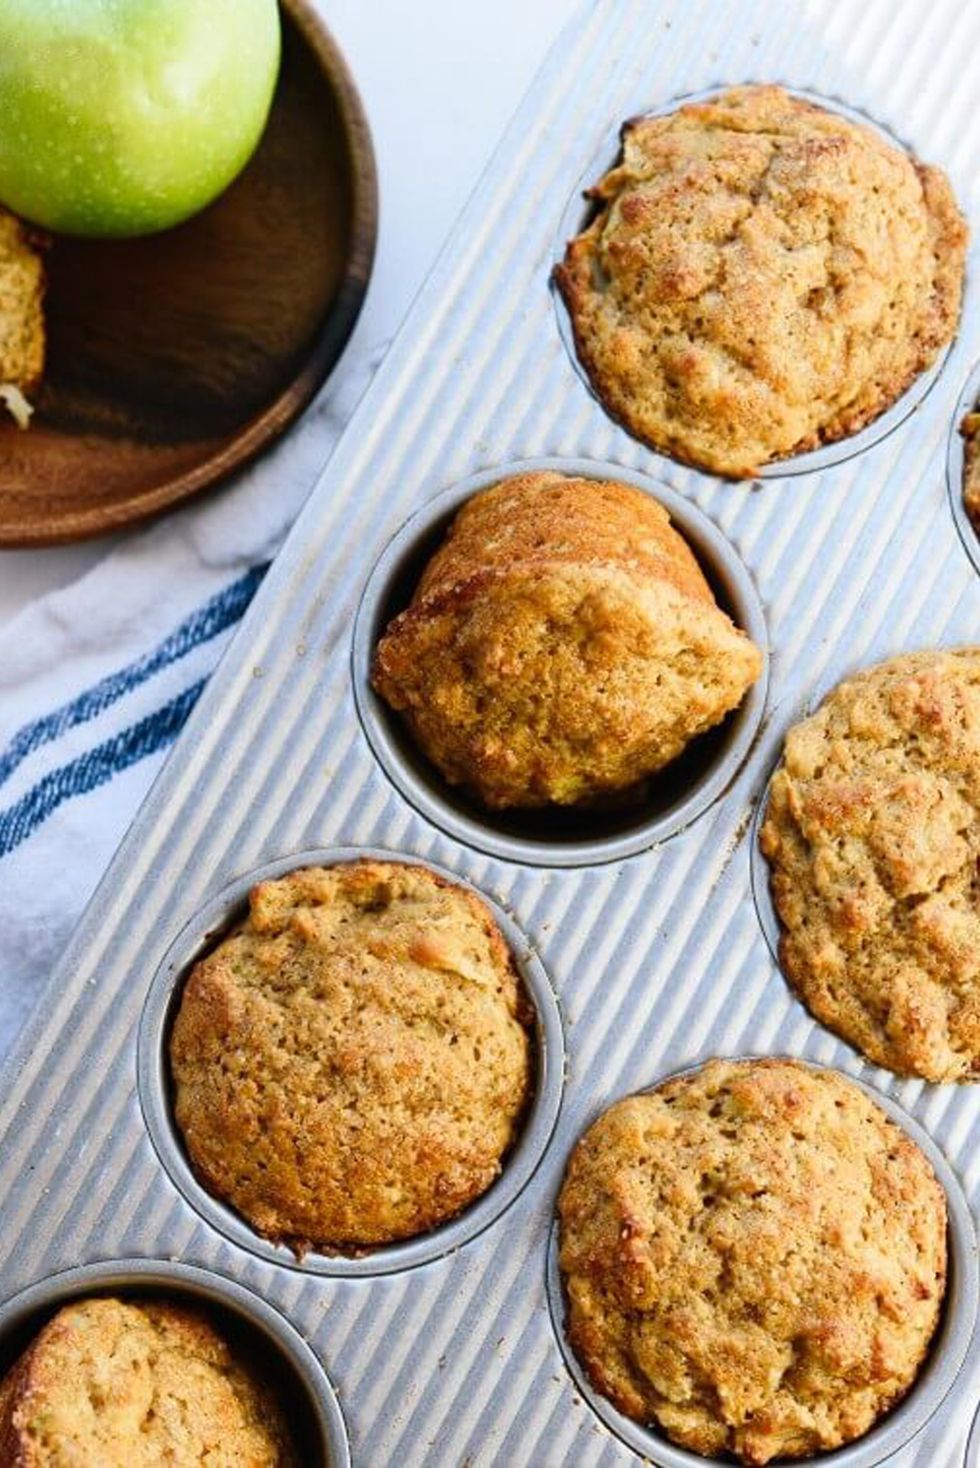 https://hips.hearstapps.com/hmg-prod/images/healthy-apple-recipes-muffins-1529518590.jpg?crop=0.919xw:1.00xh;0.0656xw,0&resize=980:*